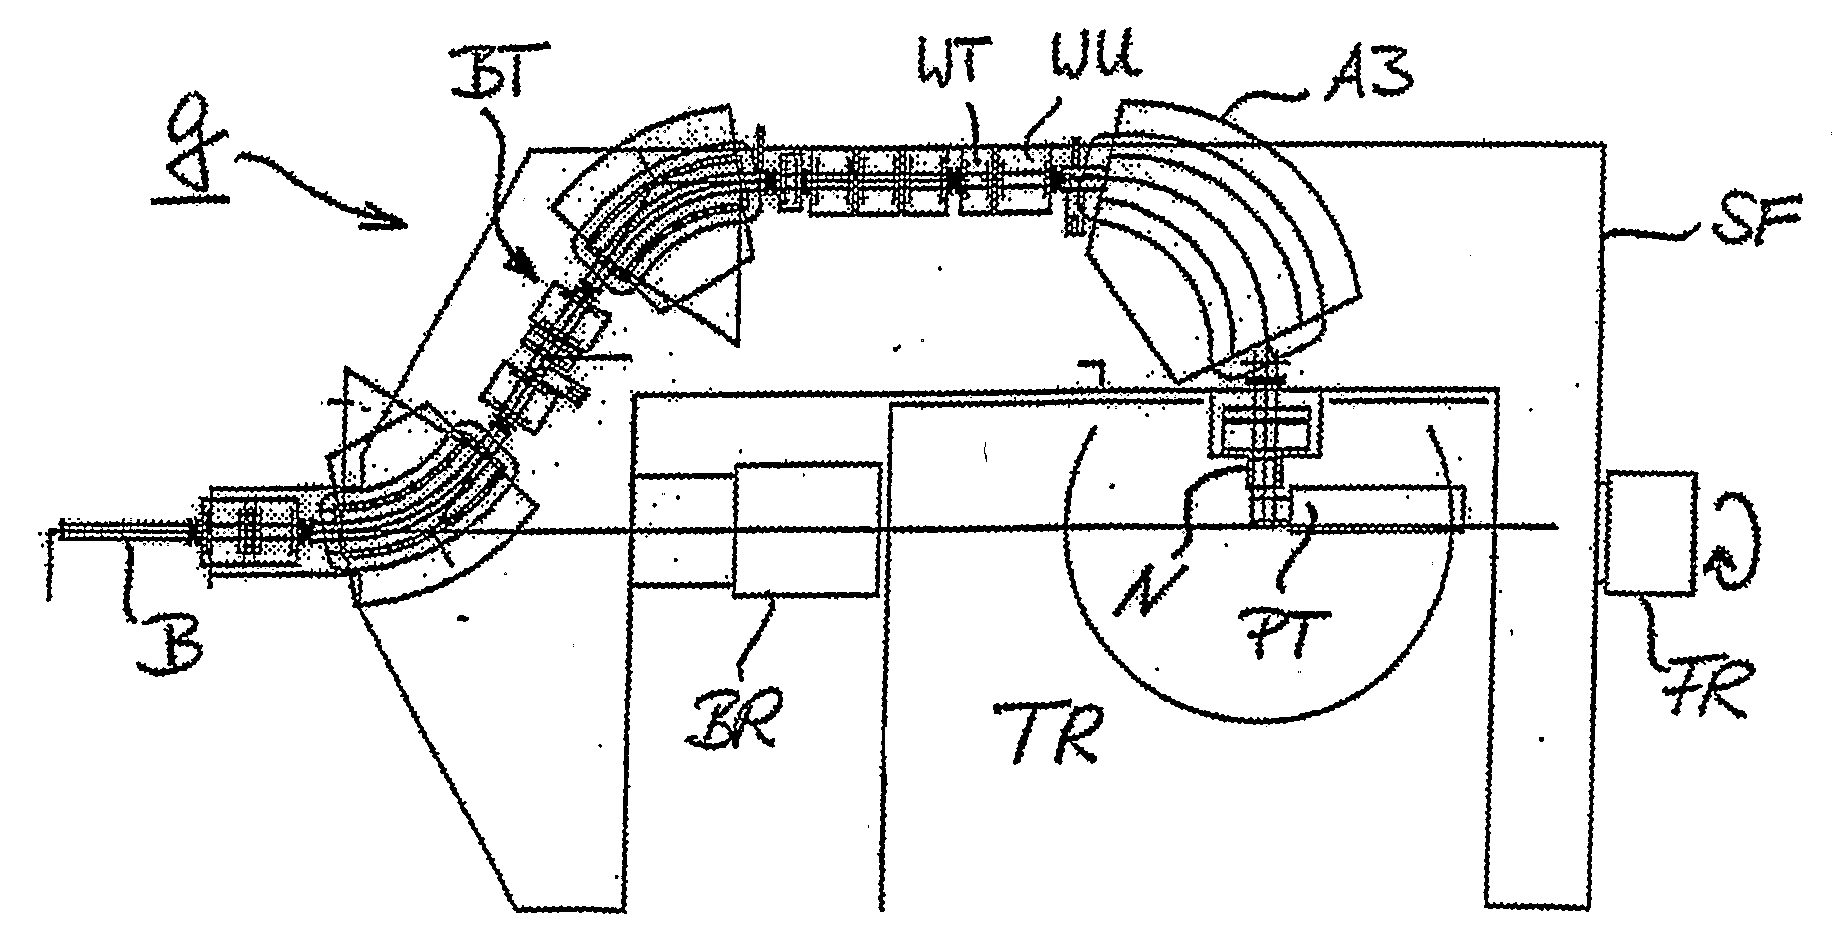 System for the Delivery of Proton Therapy